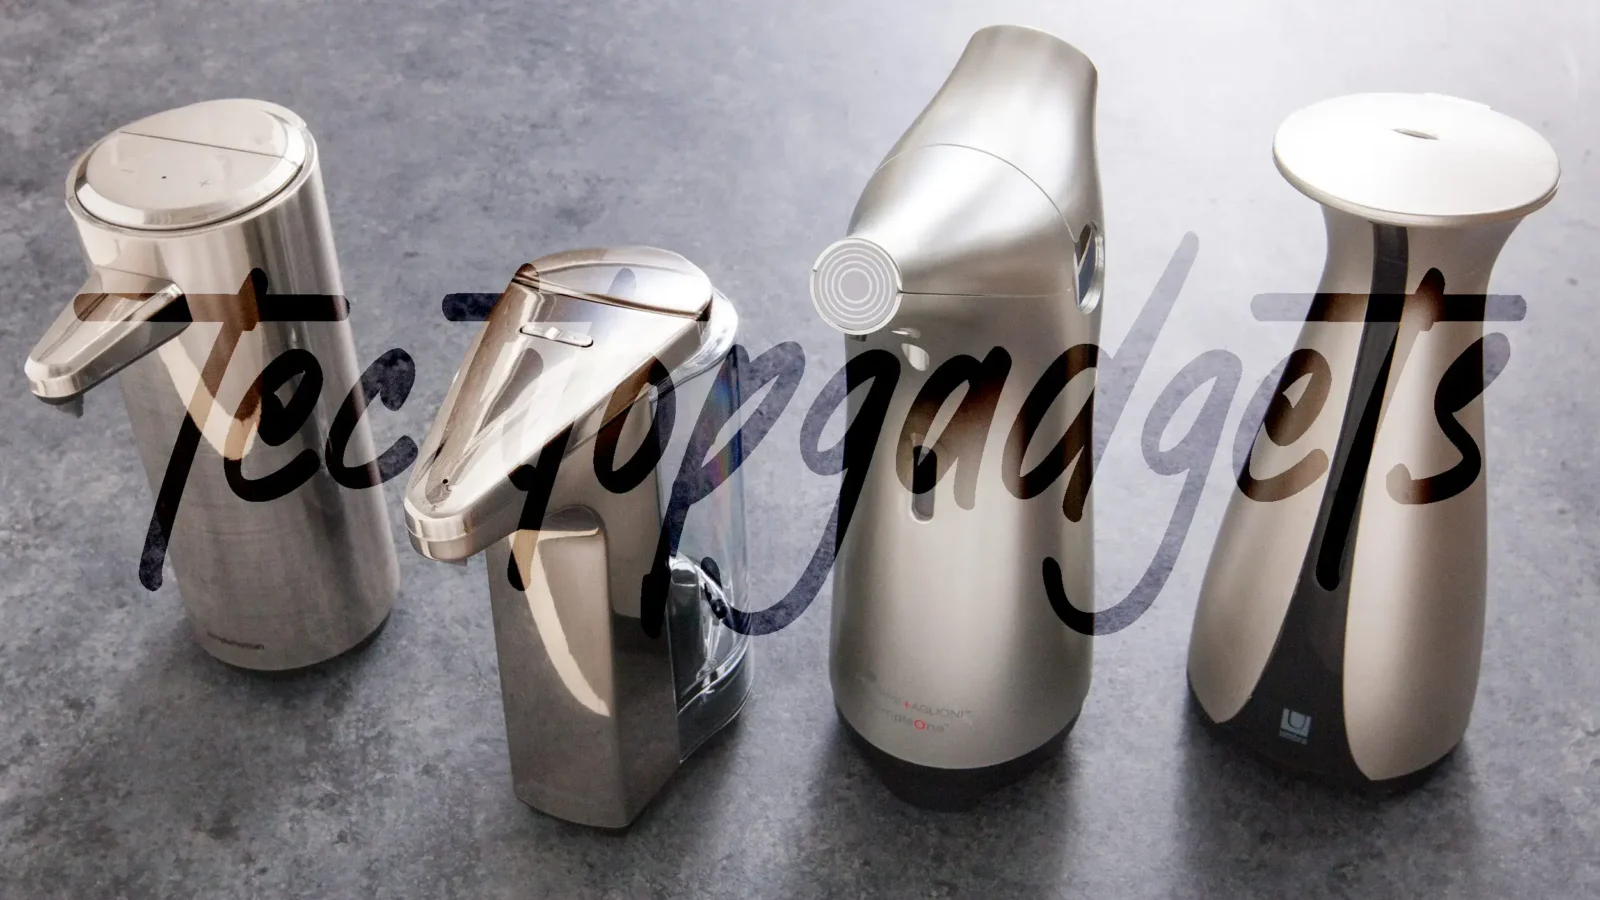 A collection of the best-rated automatic soap dispensers on the market, including various models from YIKHOM and other top brands, showcasing cutting-edge technology and design.